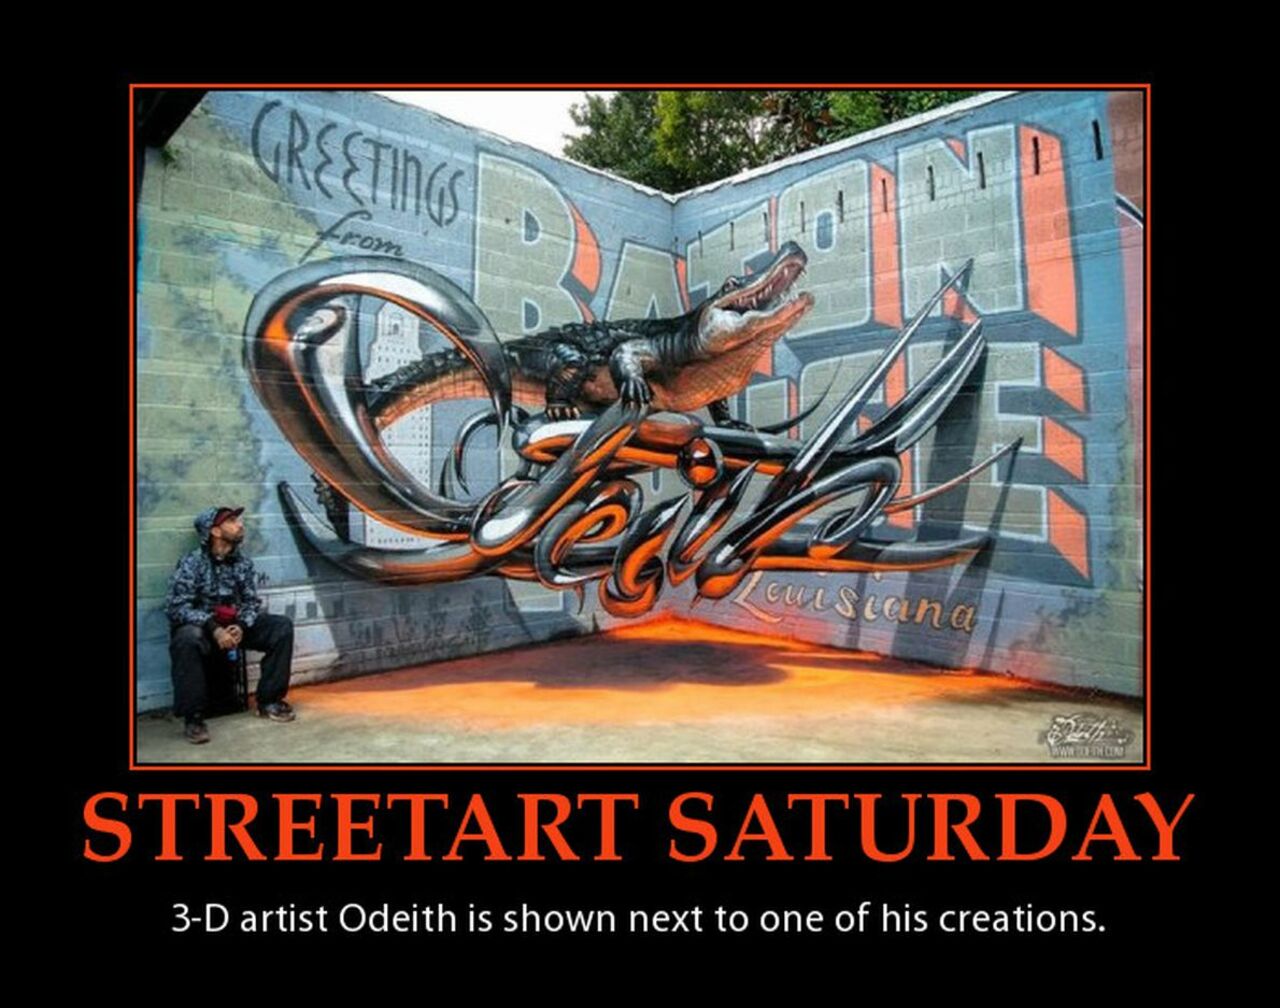 #StreetartSaturday #3D artist #Odeith poses with one of his #streetart creations using 3 walls. https://t.co/pREsMk7HTs